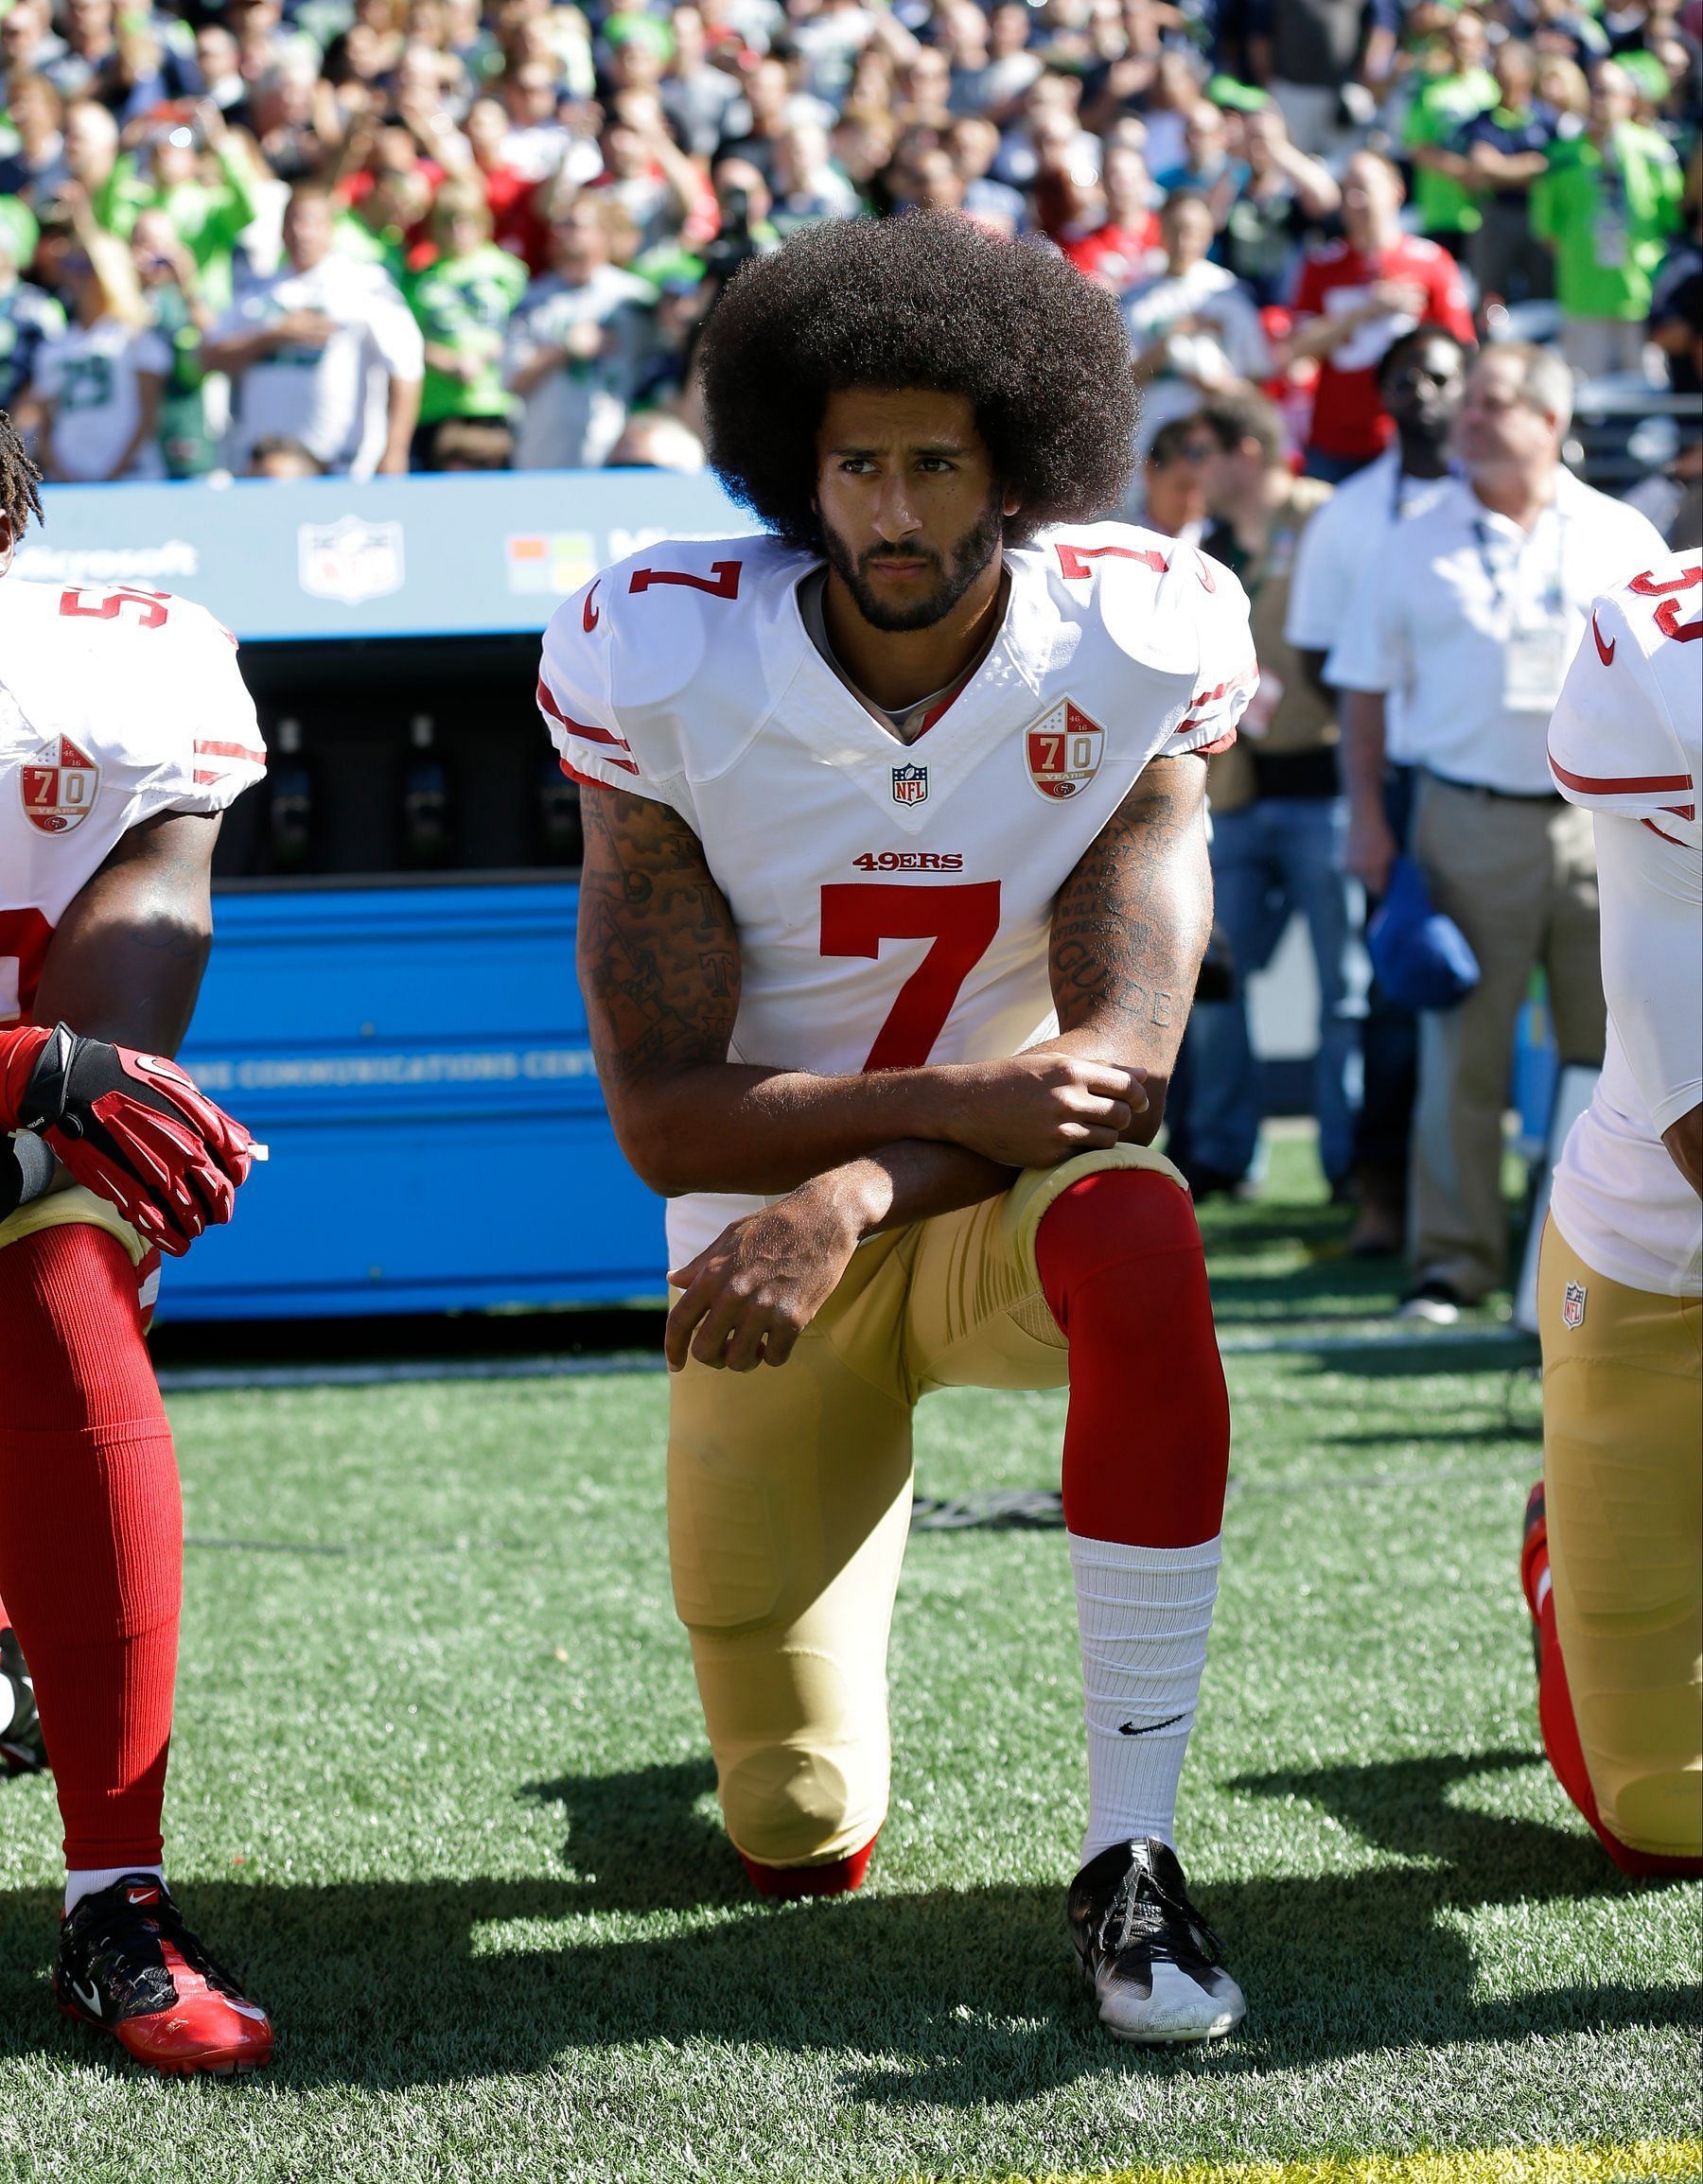 Kaepernick taking a knee during a 49ers game. Source: The New York Times